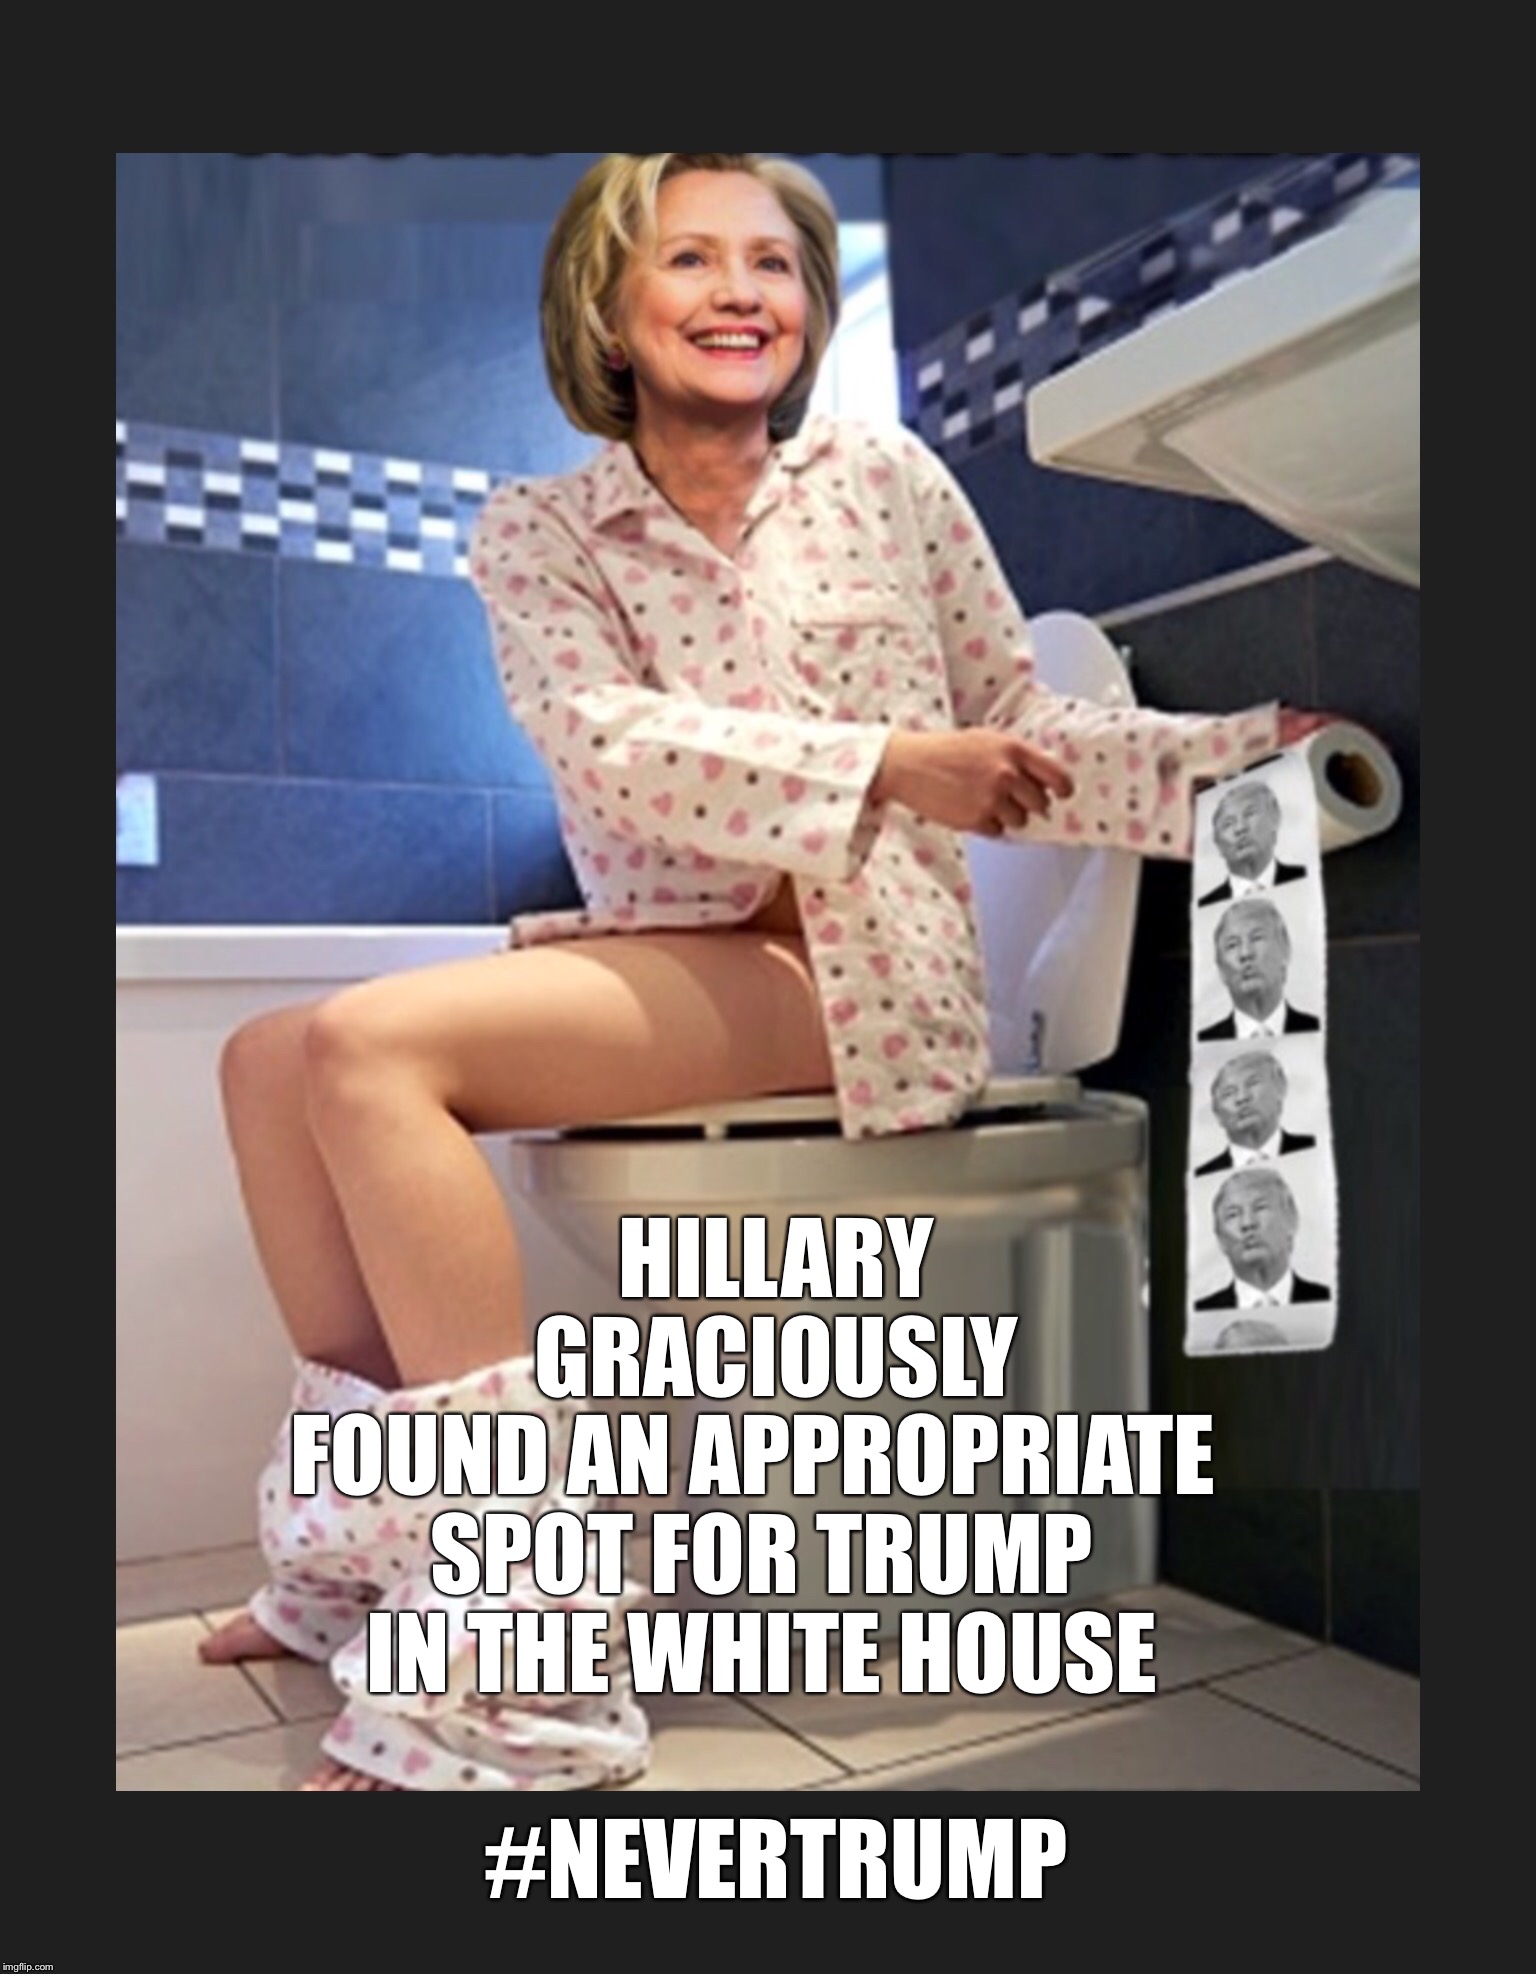 Trump dump | FOUND AN APPROPRIATE SPOT FOR TRUMP IN THE WHITE HOUSE; HILLARY GRACIOUSLY; #NEVERTRUMP | image tagged in dump trump | made w/ Imgflip meme maker